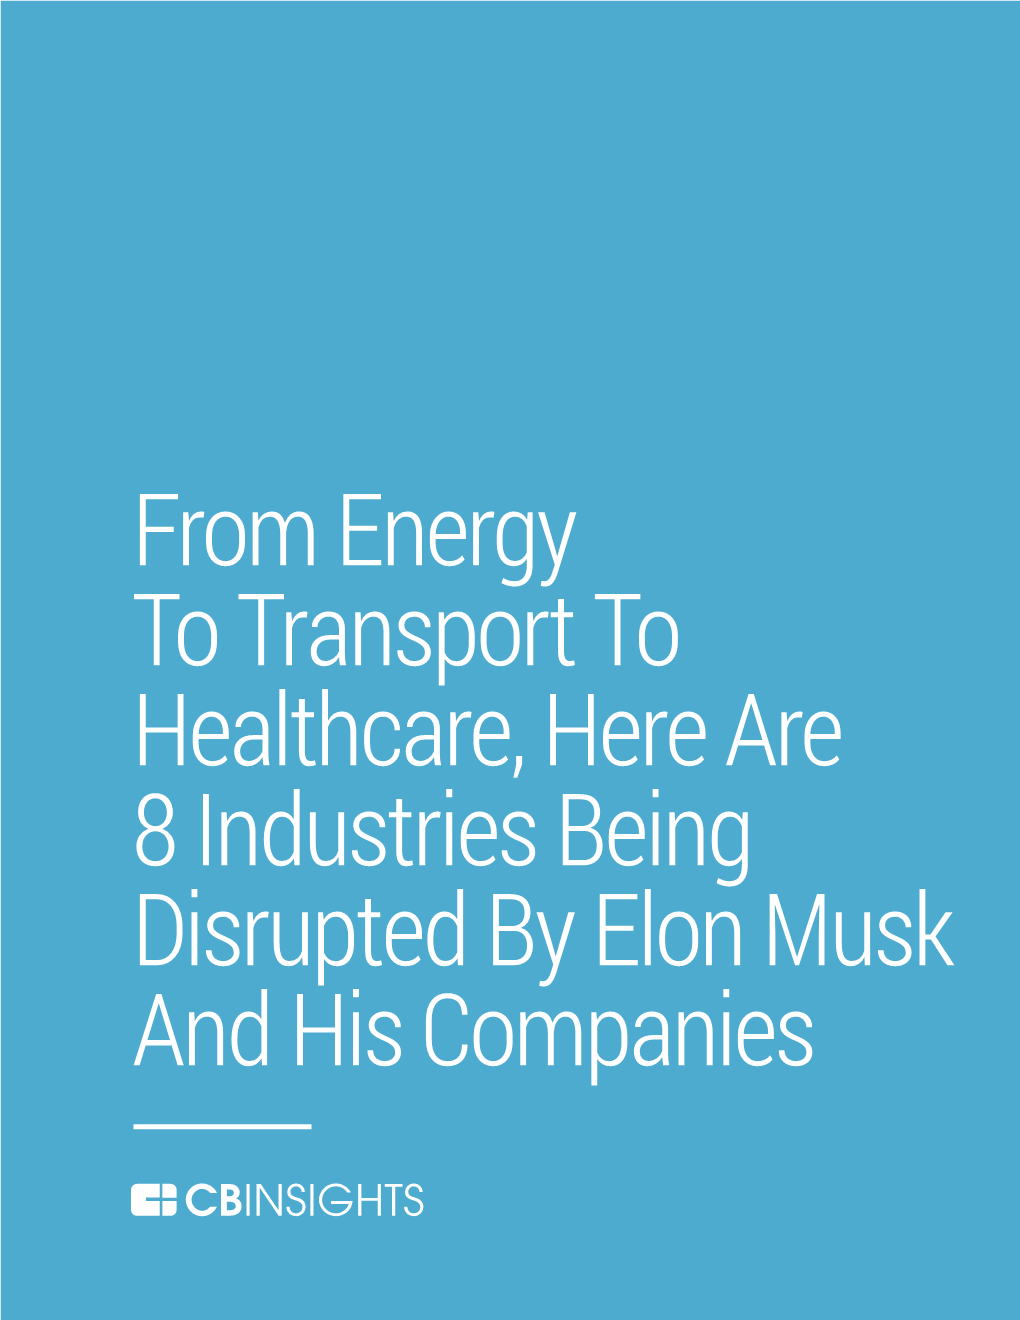 8 Industries Being Disrupted by Elon Musk and His Companies